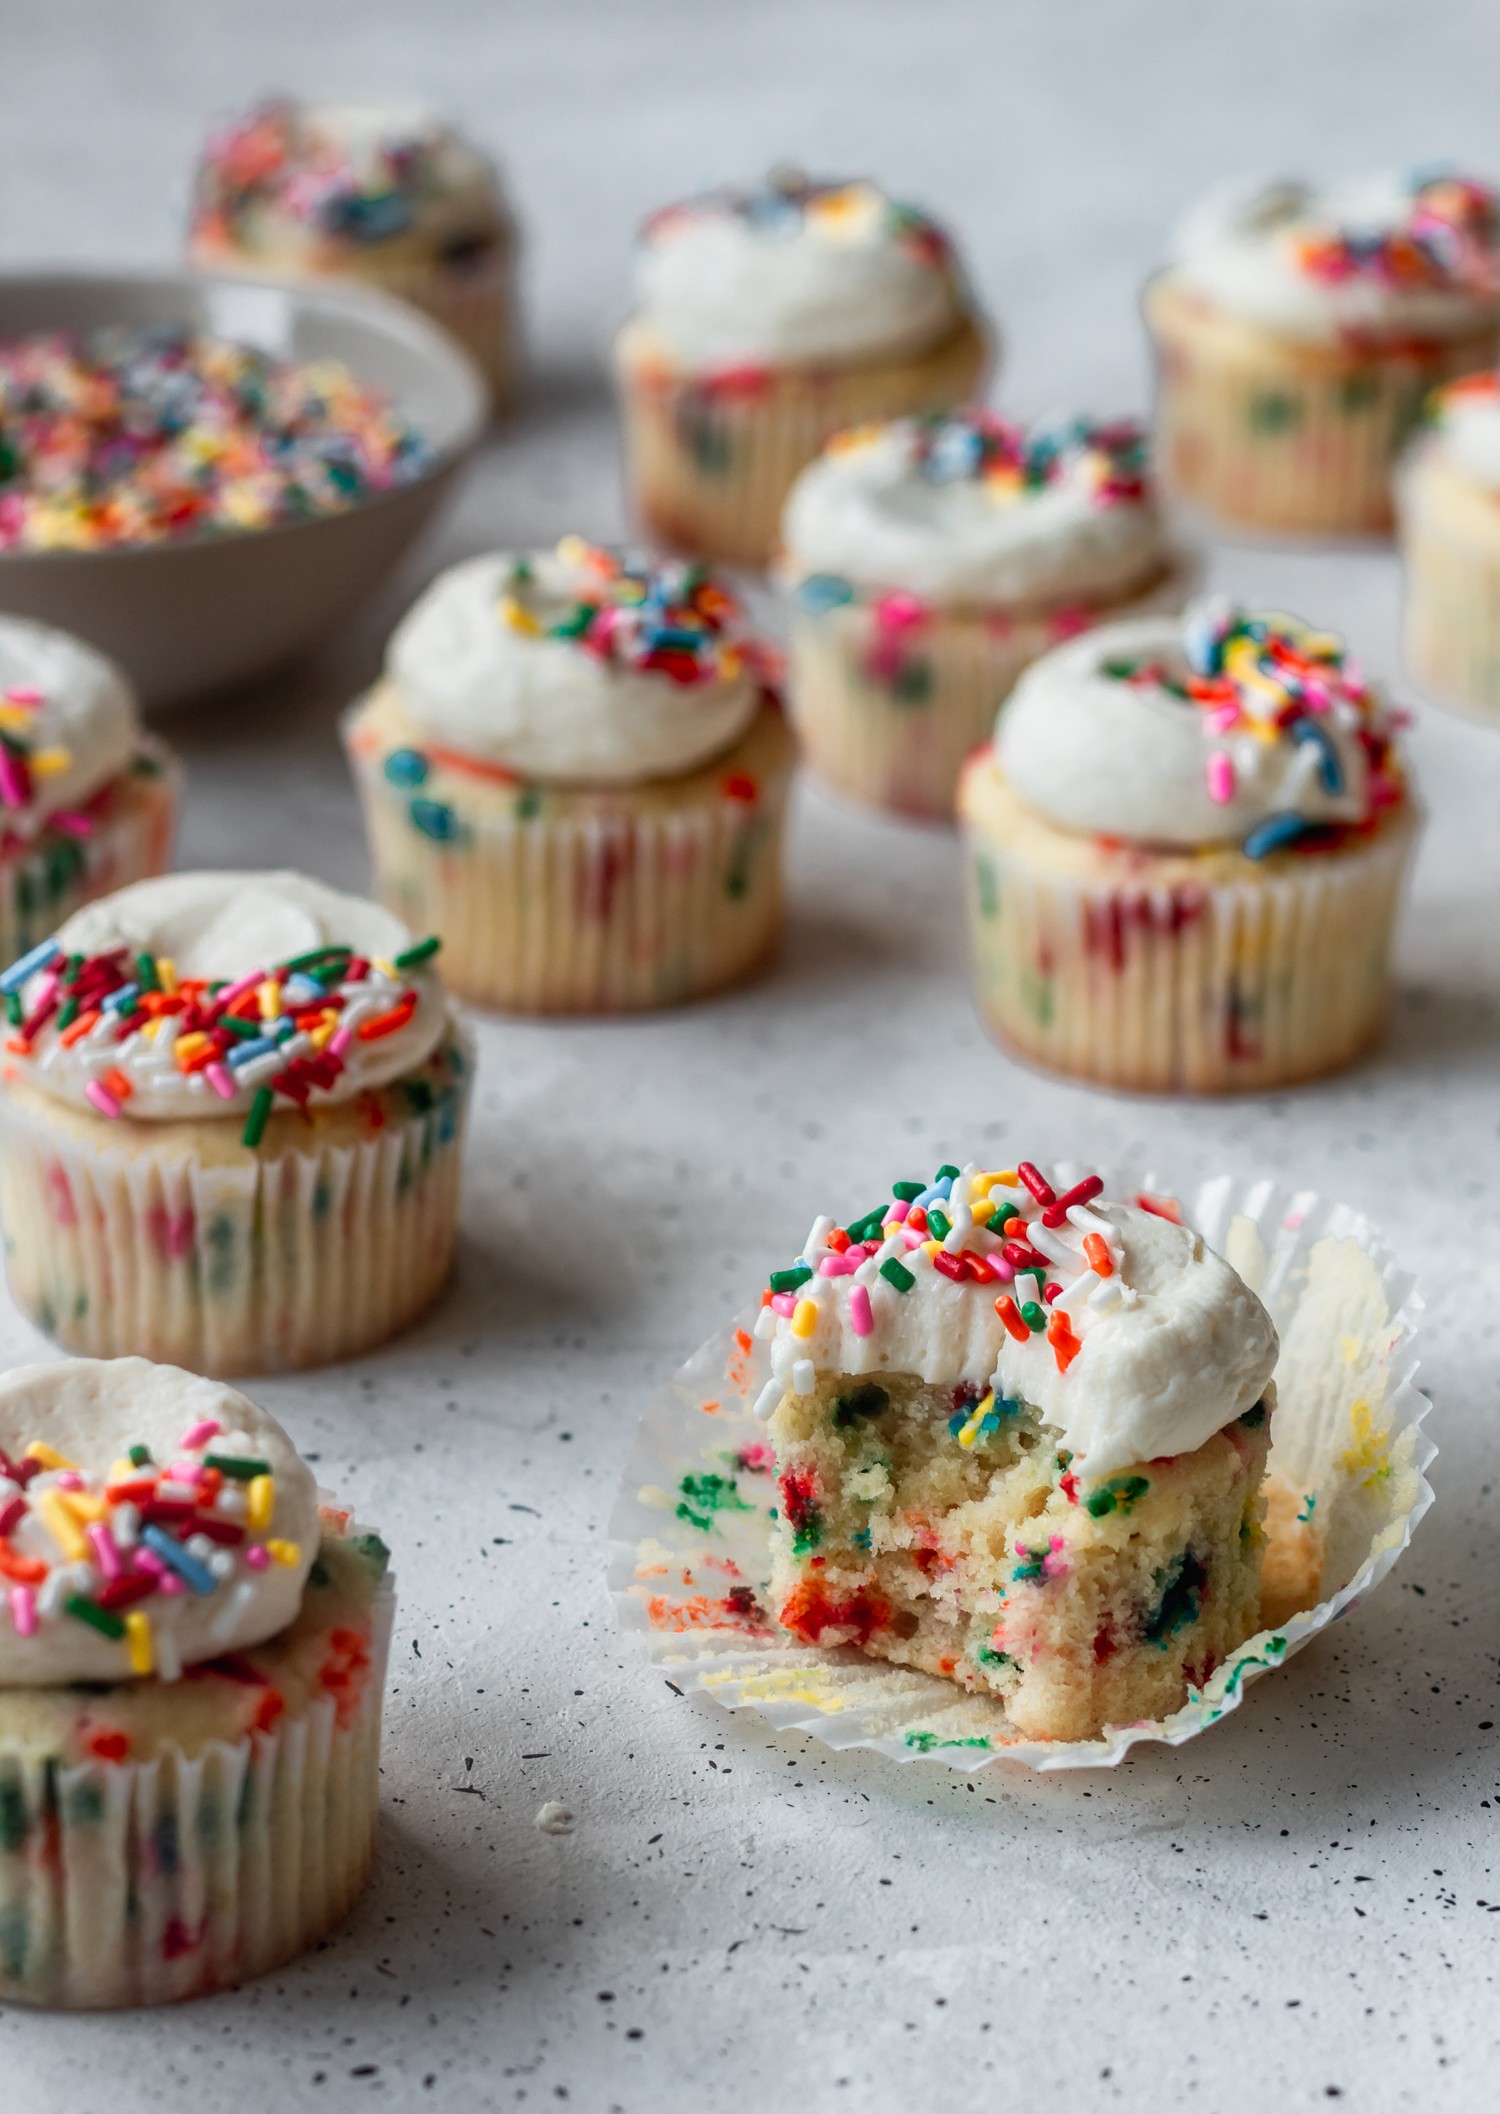 A closeup of a sprinkle cupcake with a bite taken out of it, surrounded by more sprinkle cupcakes on a grey background.